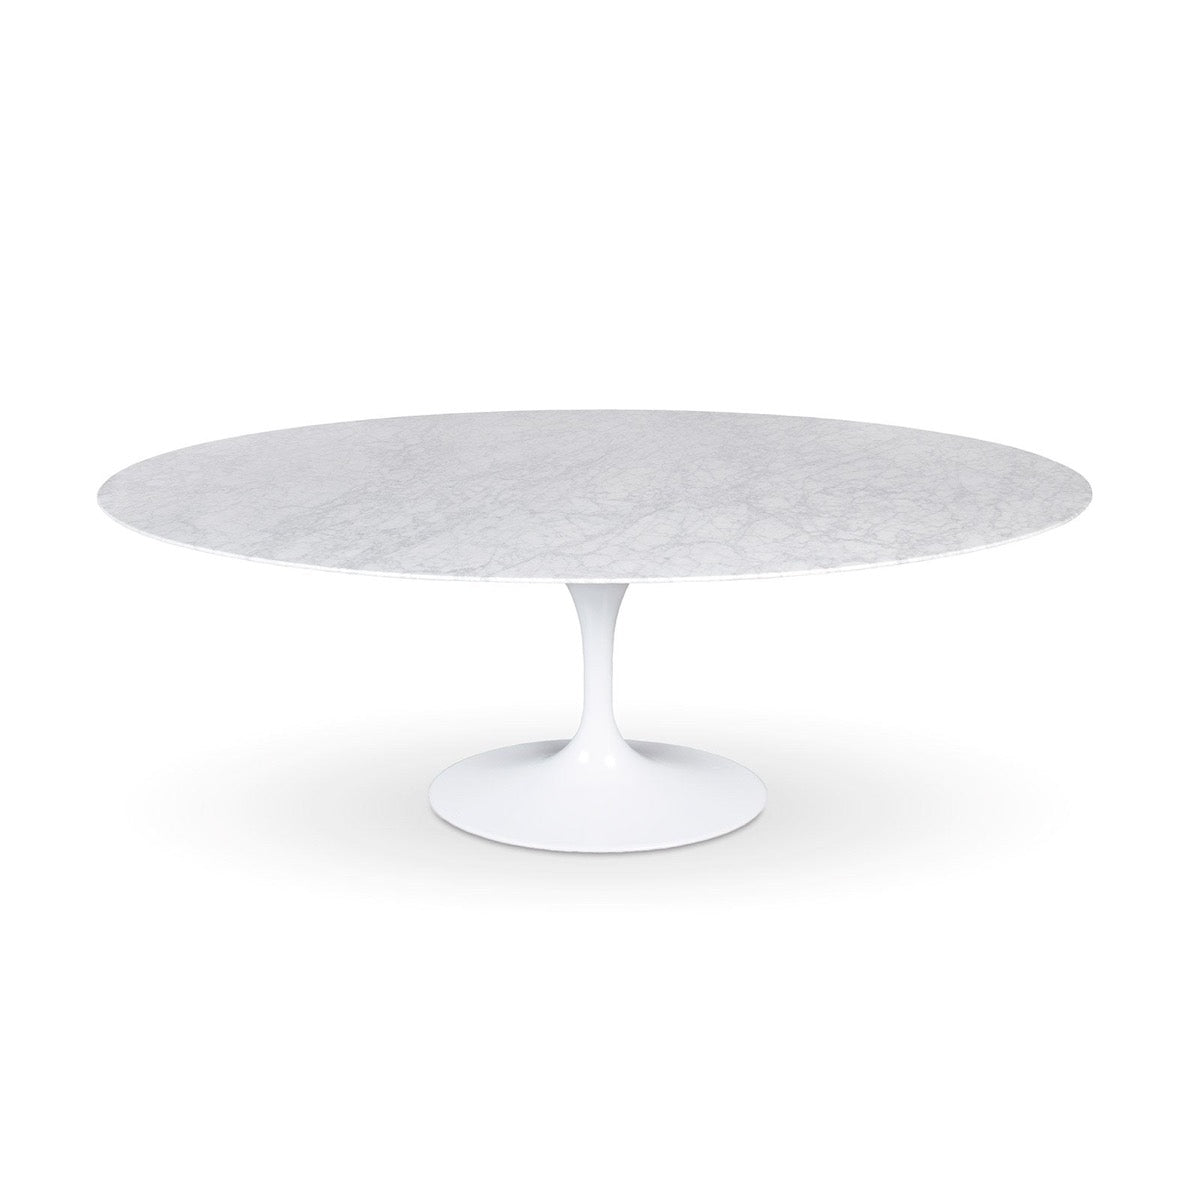 Trumpet Dining Table Oval with Marble Top - Large Dining Tables 